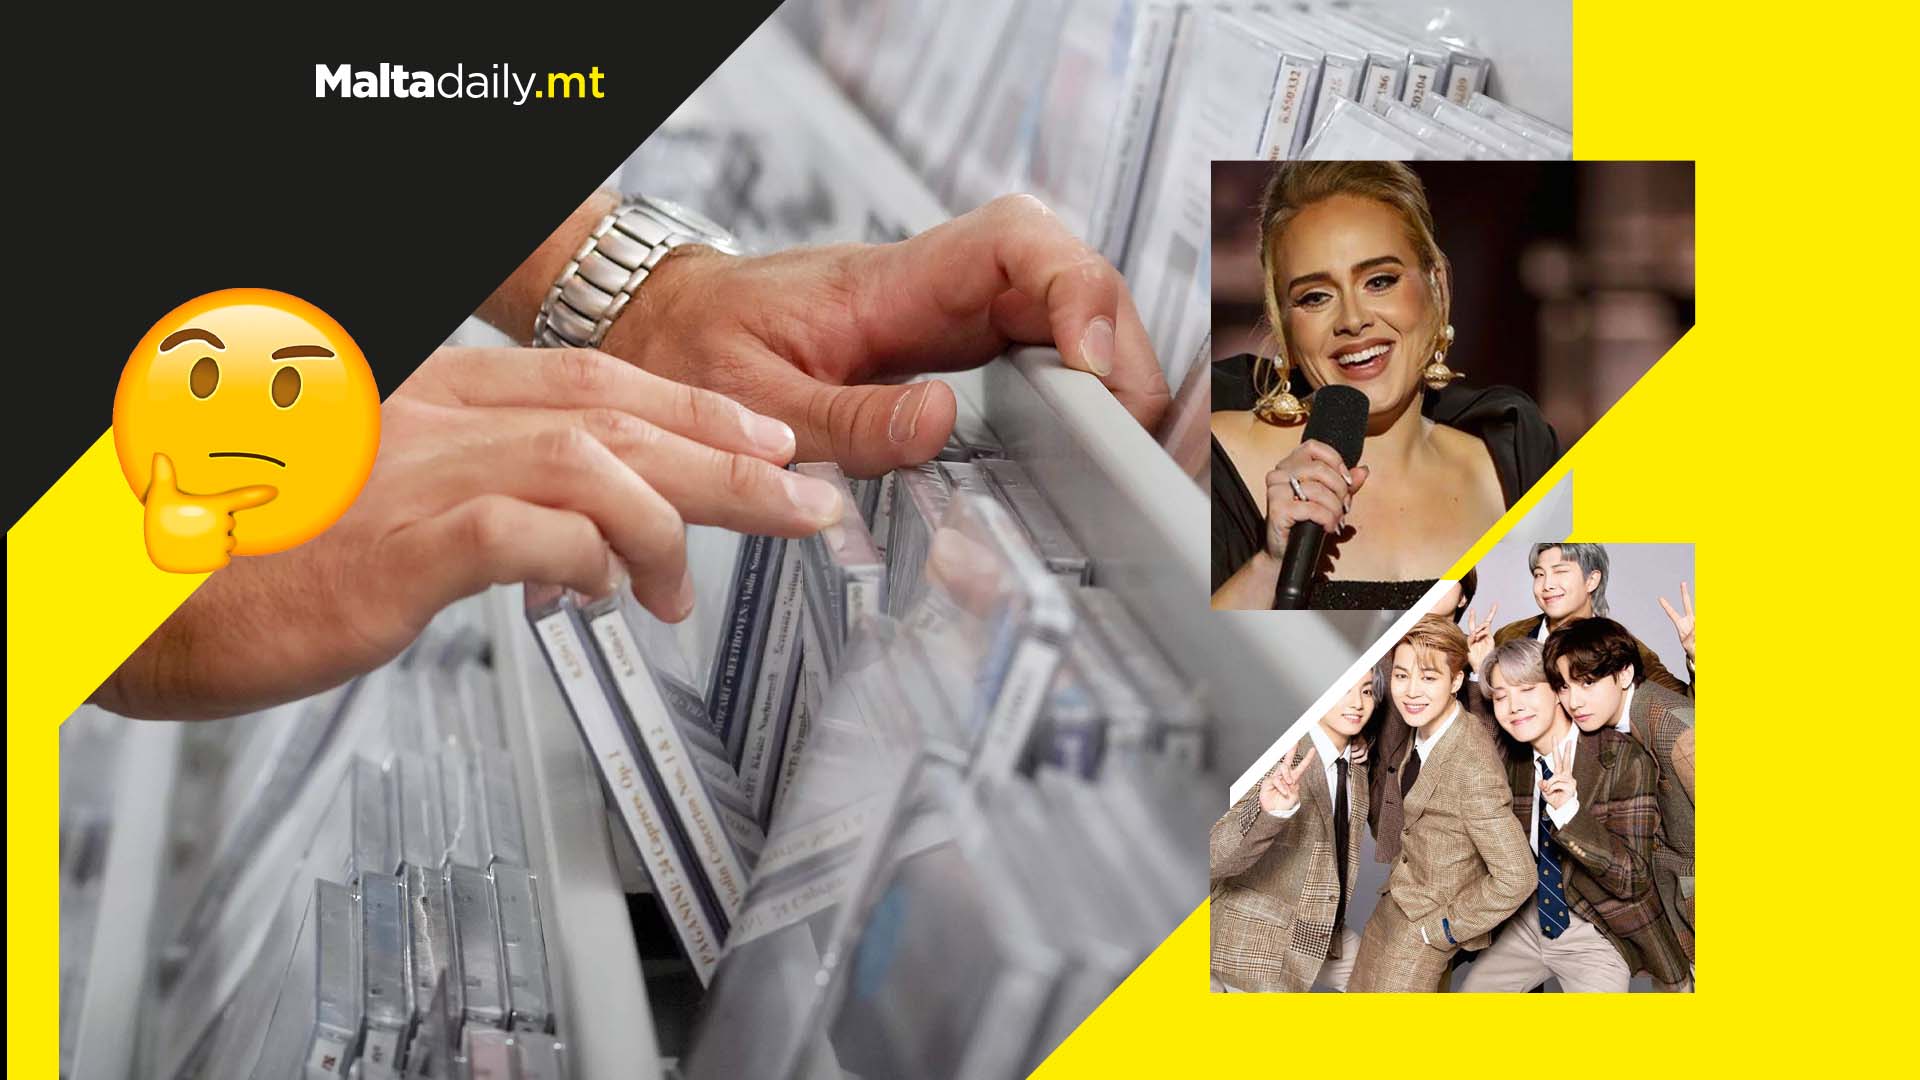 CD sales increase for the first time since 2004 with Adele at the top